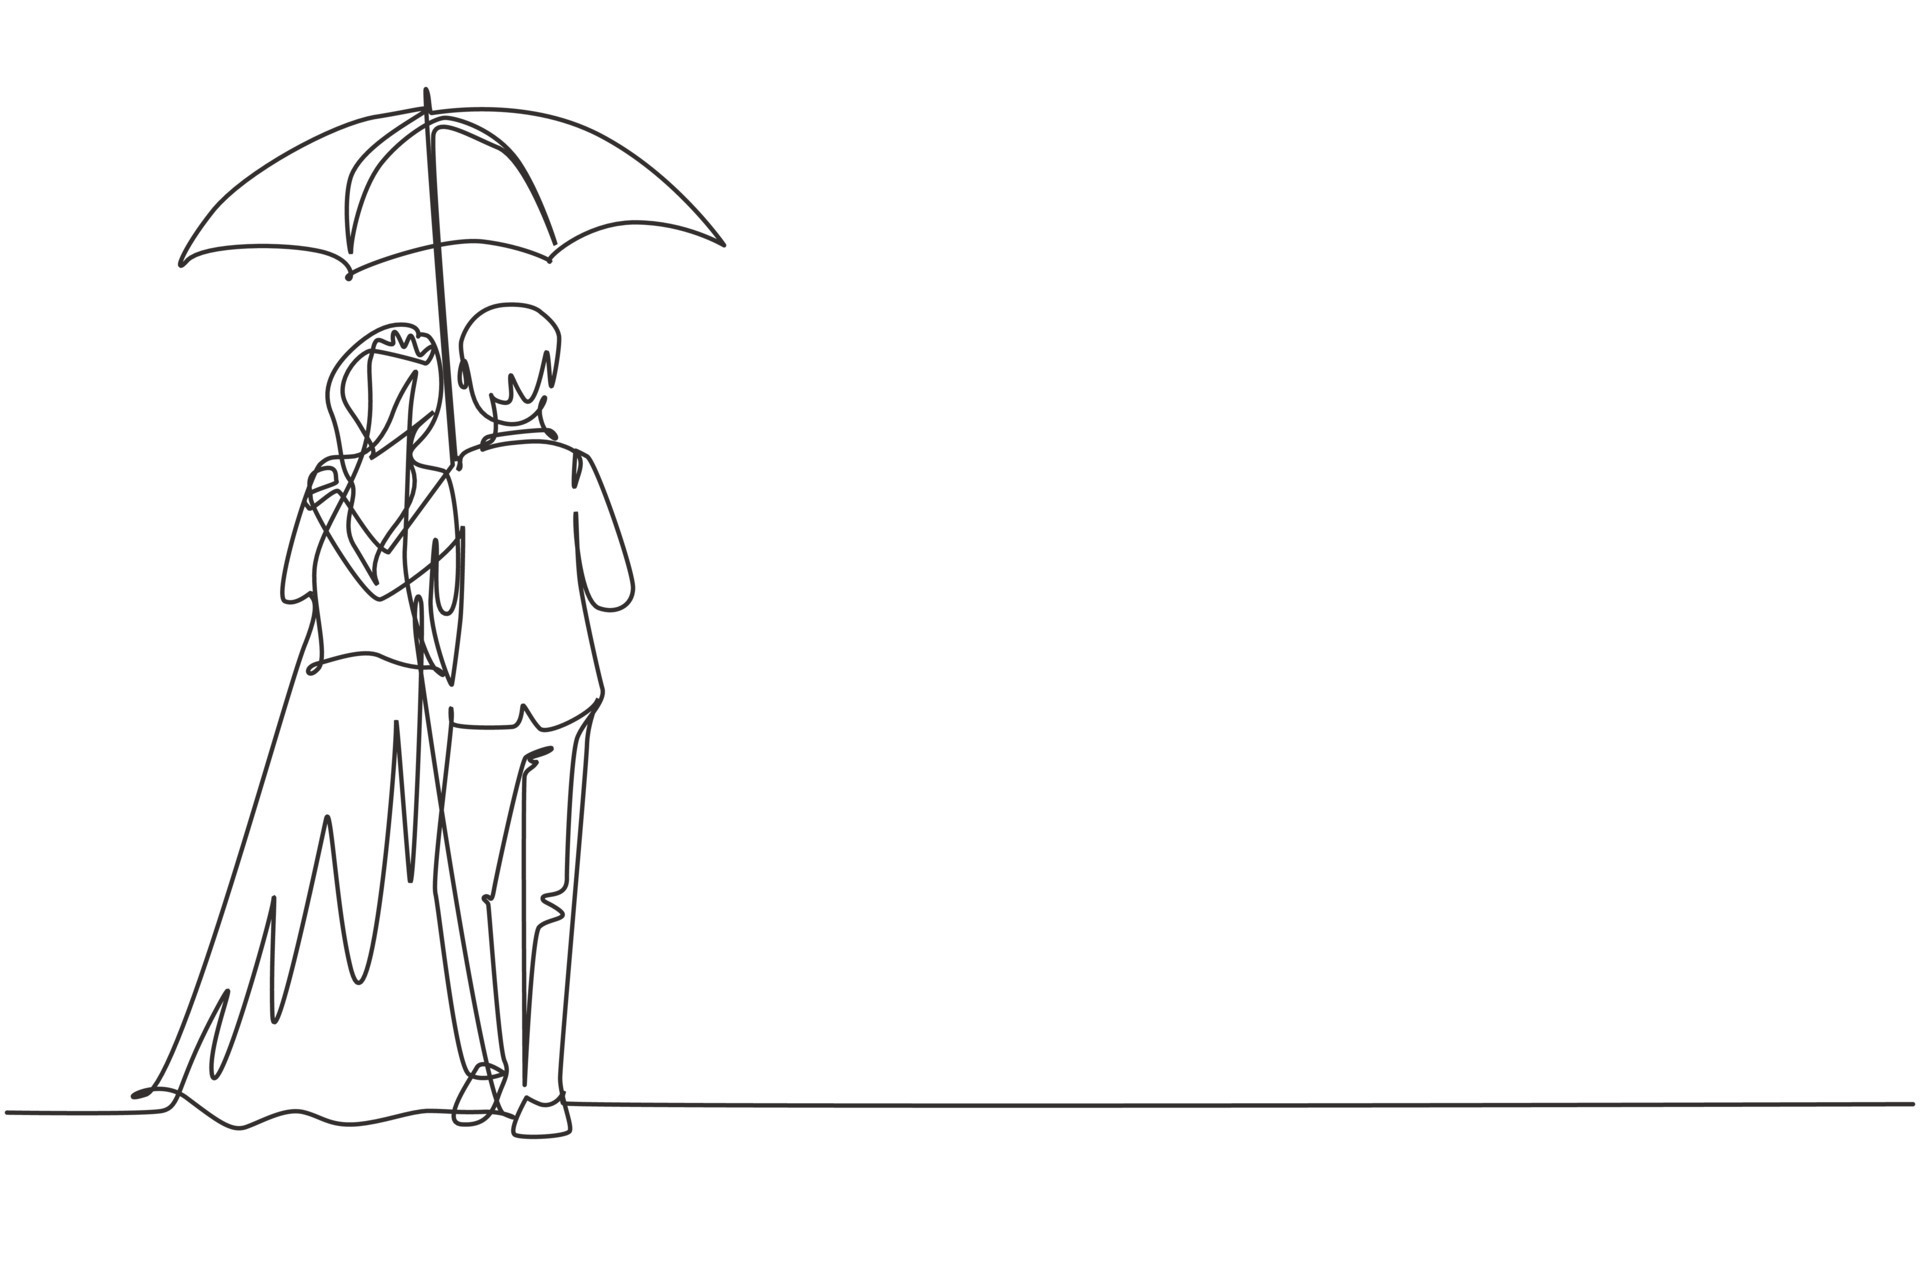 Premium Vector | Sketches of casual couple citizens walking down street